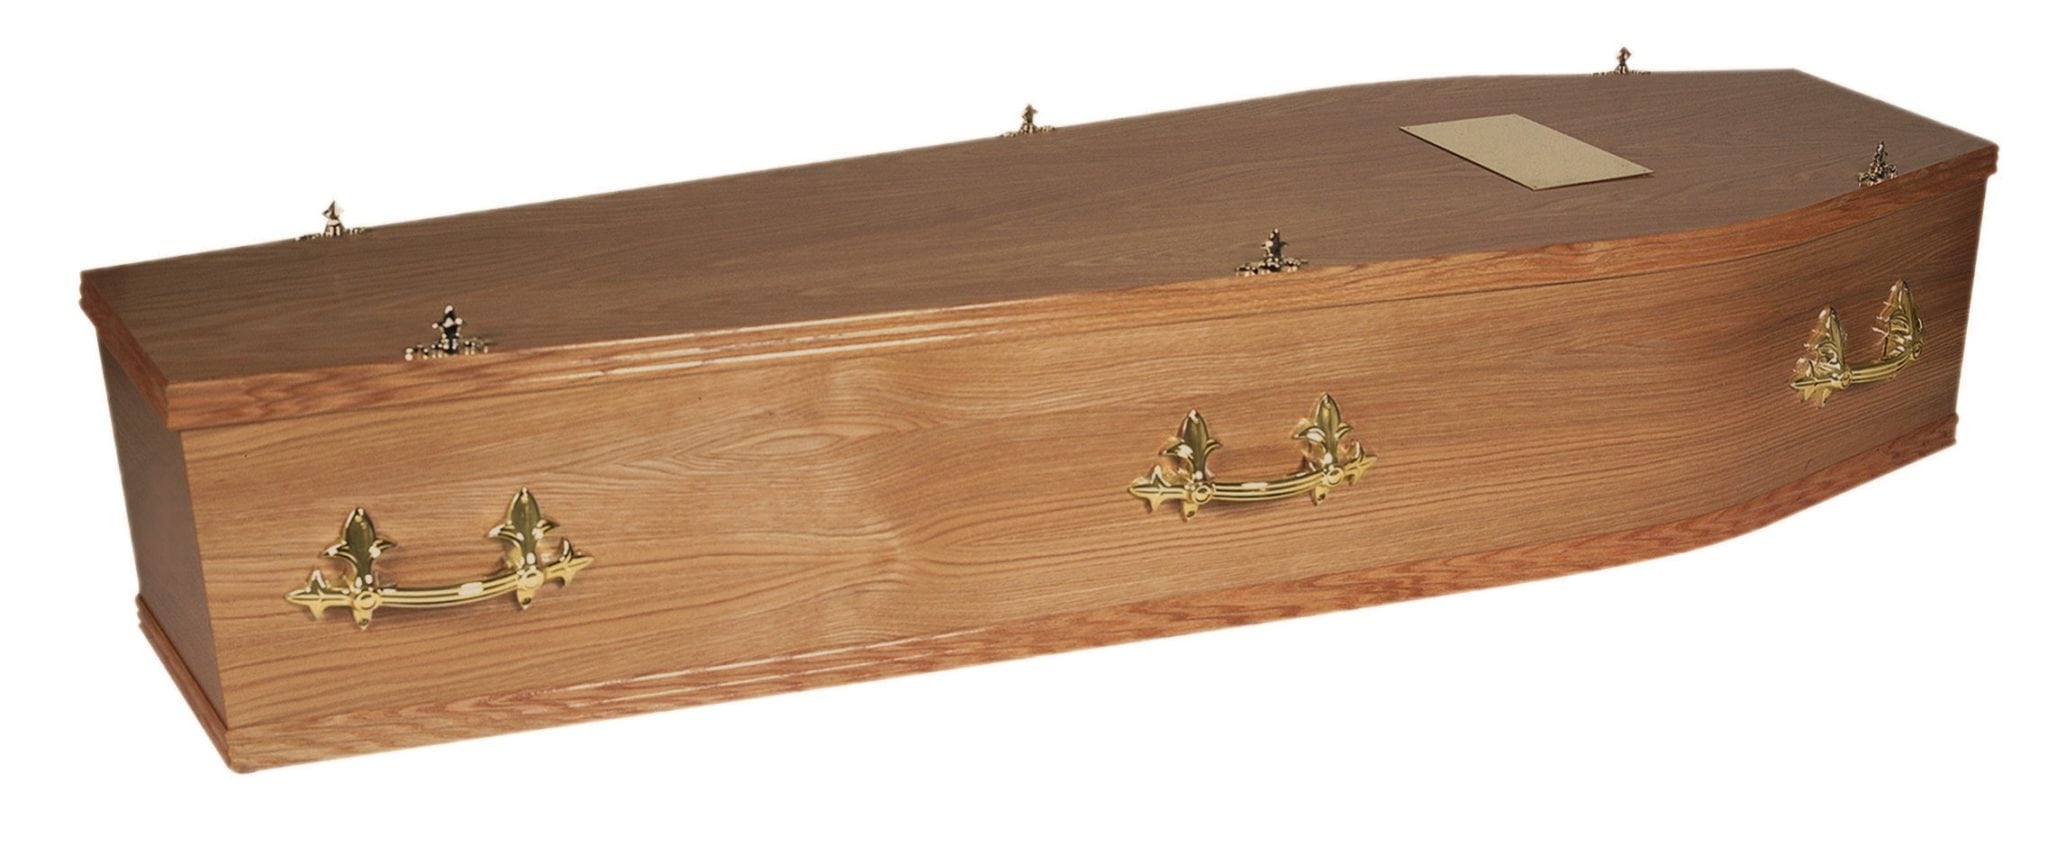 Large traditional wooden coffin